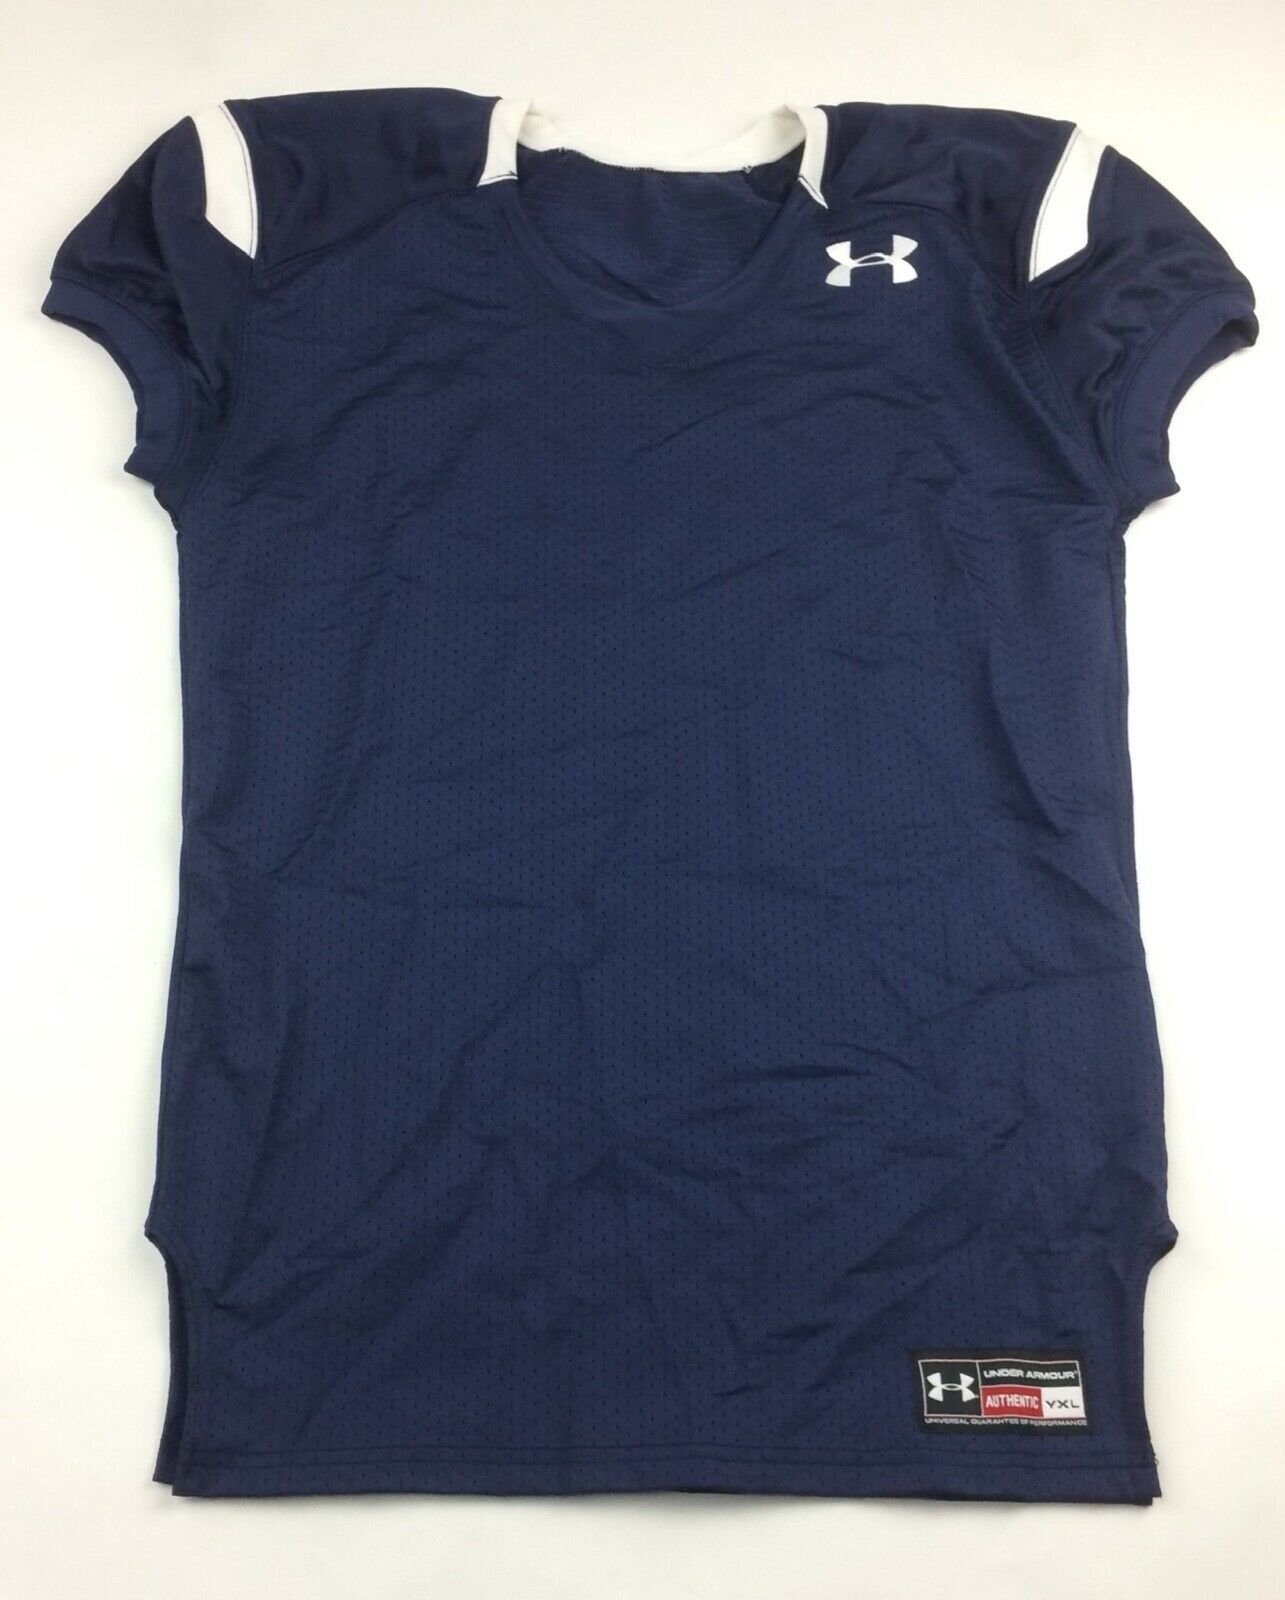 New Under Armour Performance Football Jersey and 30 similar items